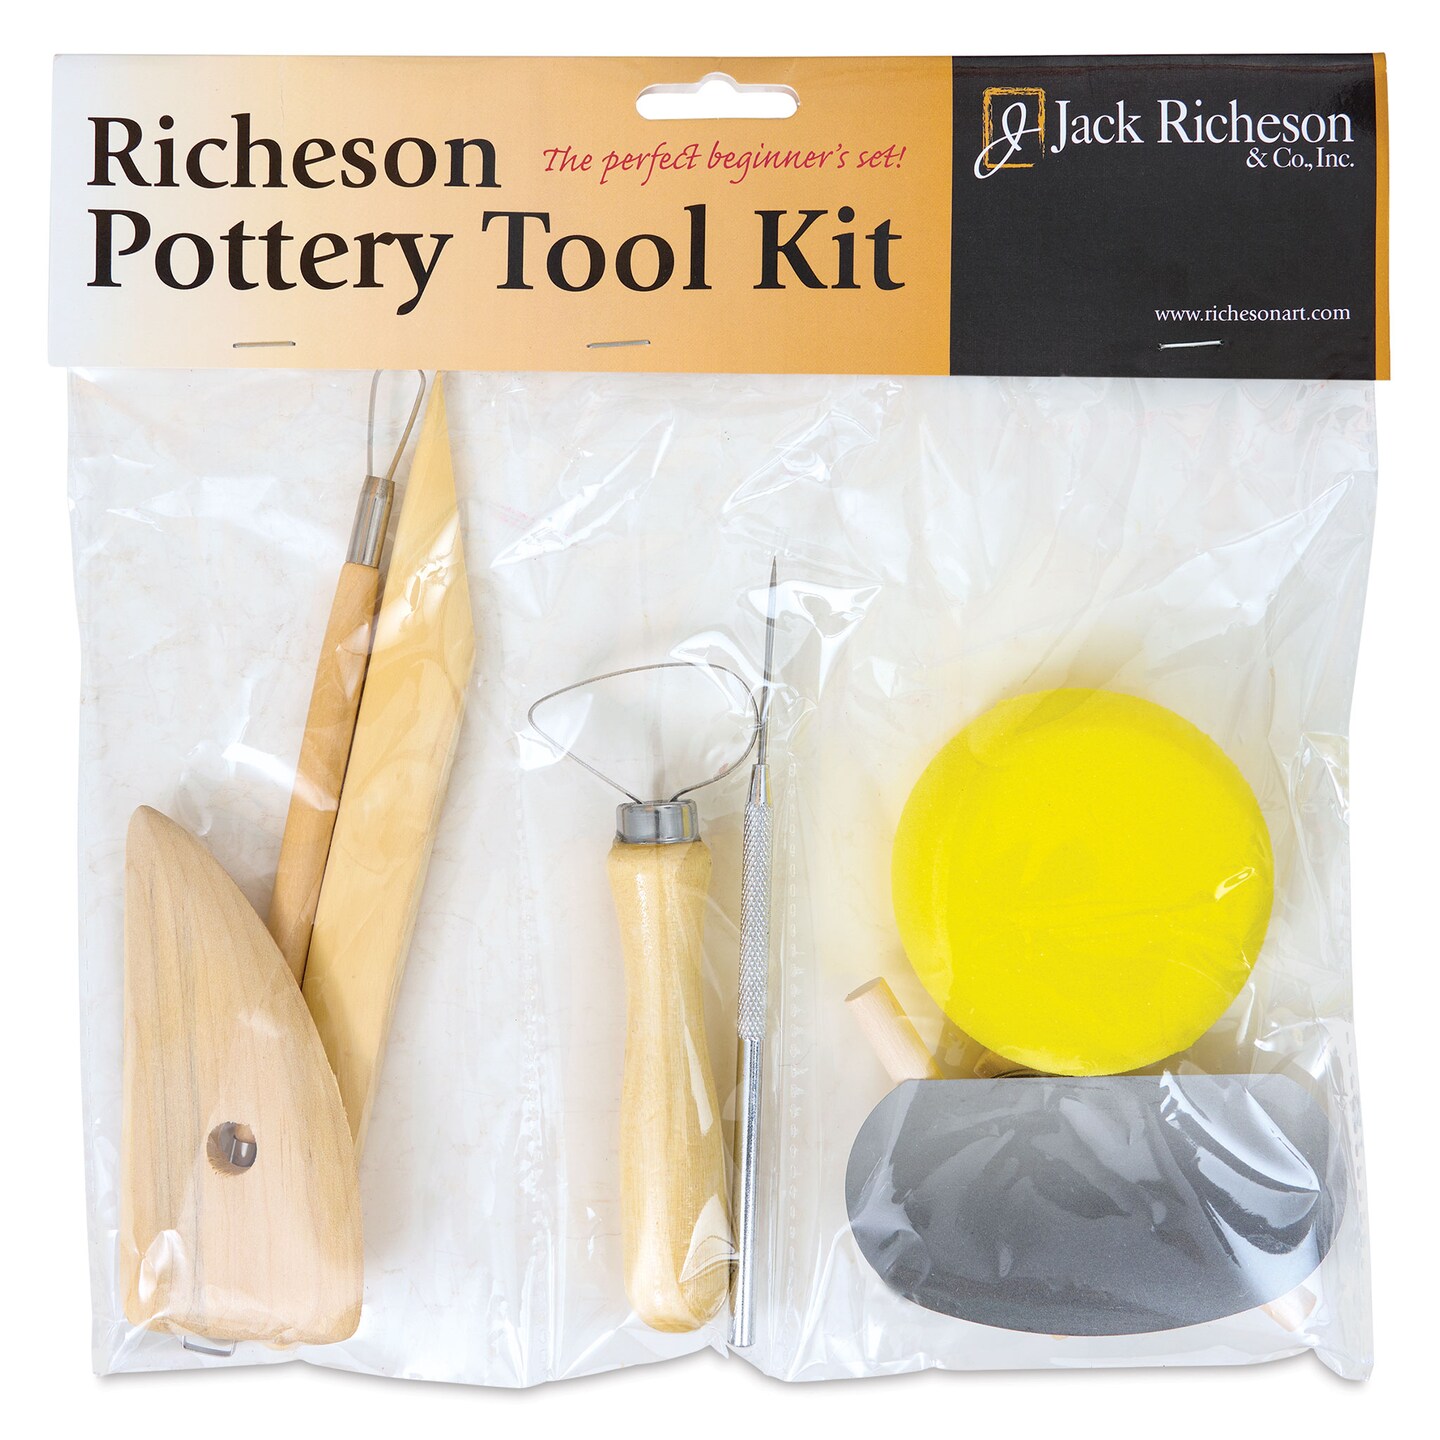 Potter's Tool Kit with 8 Essential Tools